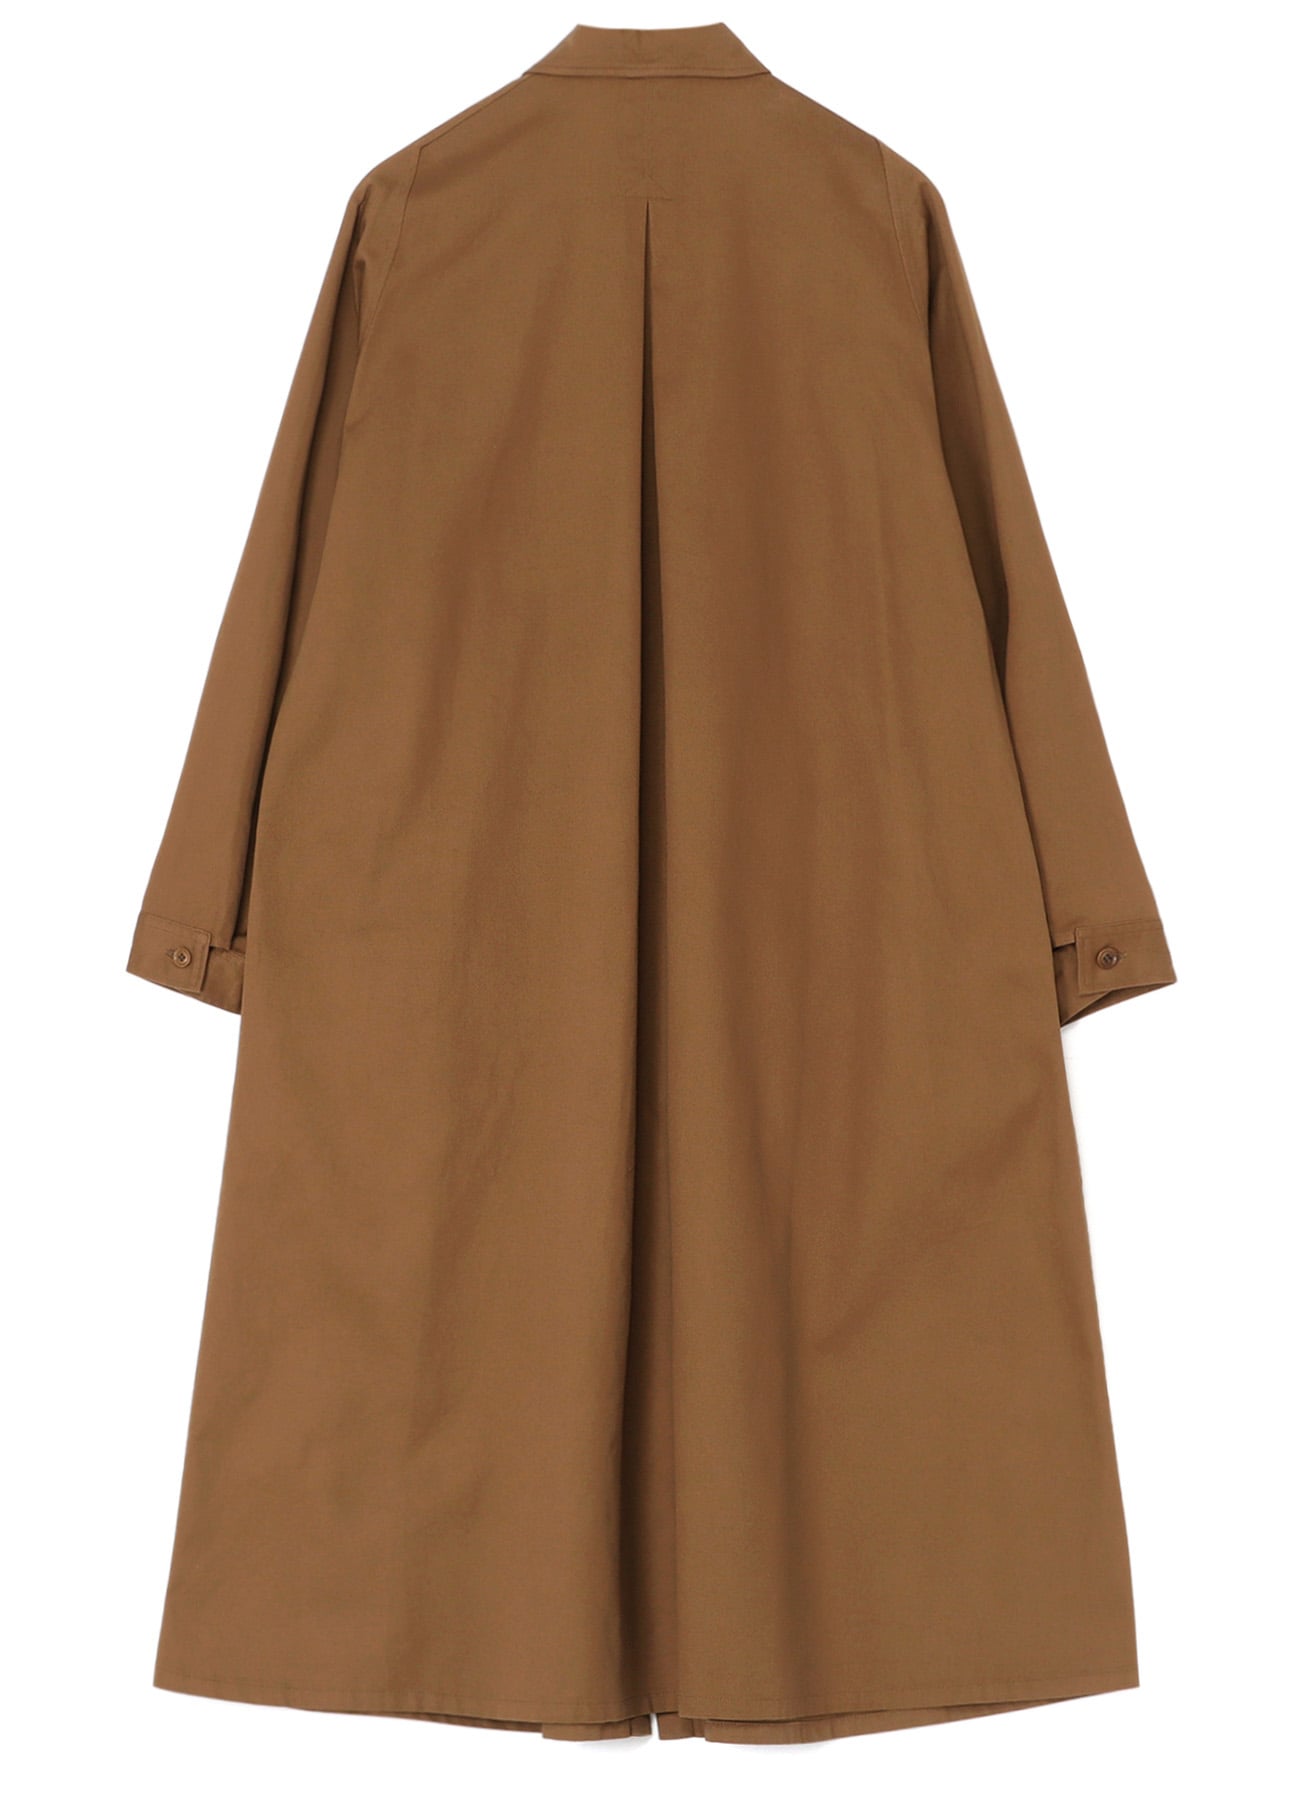 Y's BORN PRODUCT] COTTON TWILL DOUBLE CHEST POCKET DRESS(XS Brown